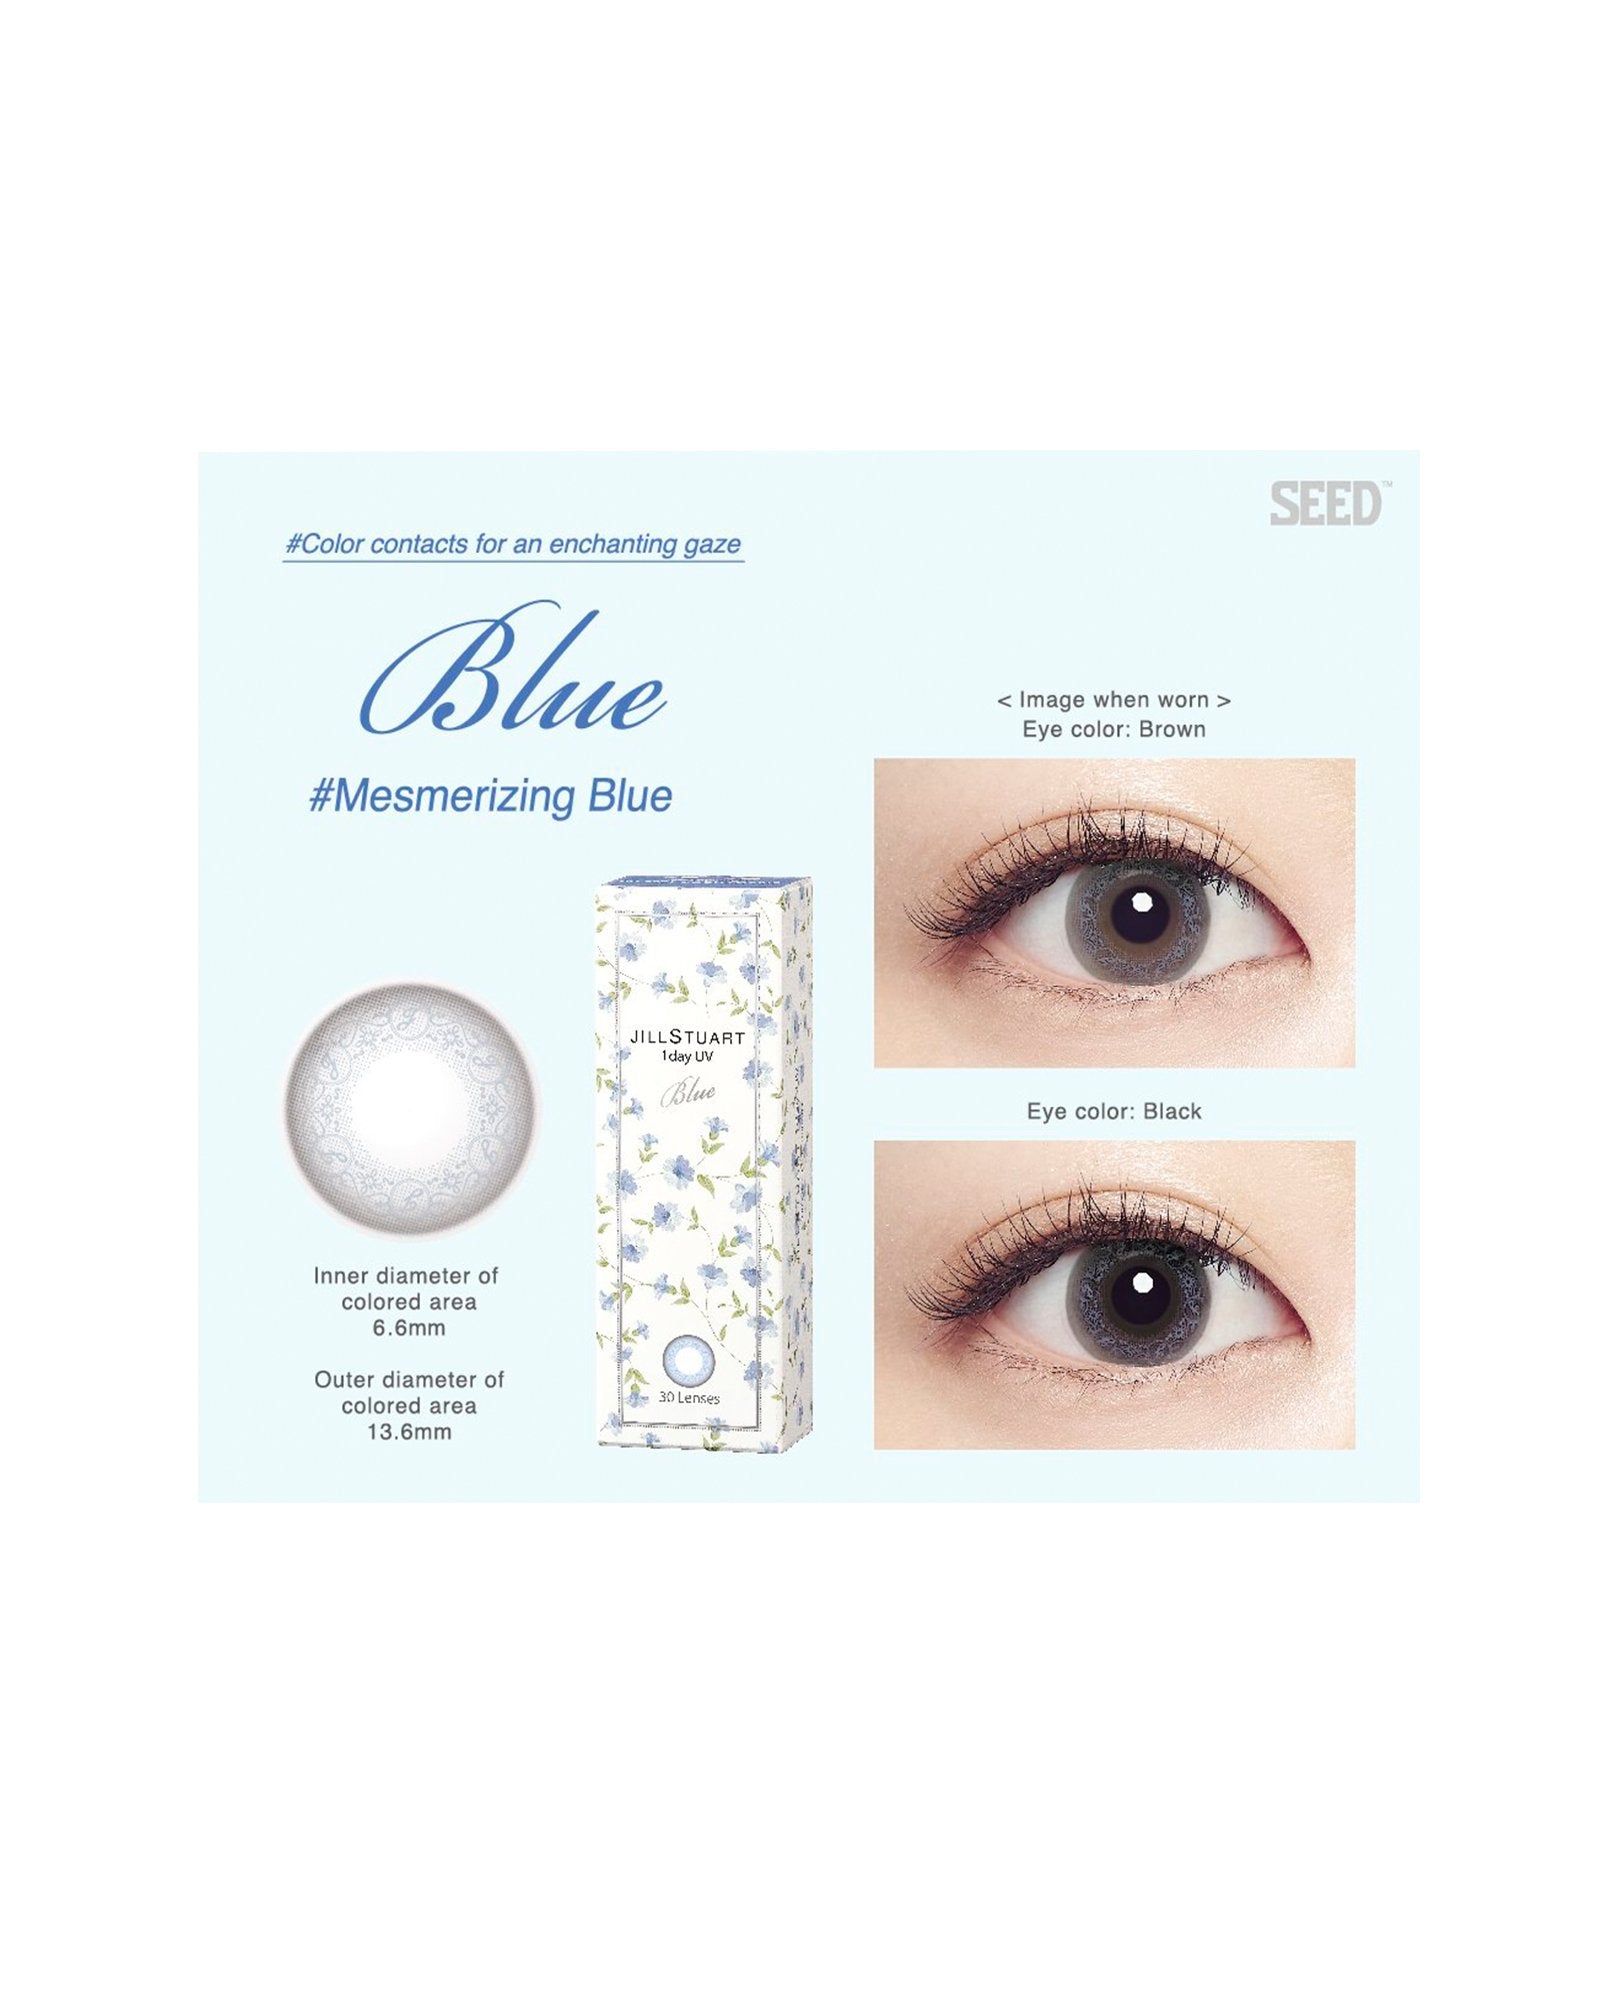 Jill 1 Day UV - Eleven Eleven Contact Lens and Vision Care Experts